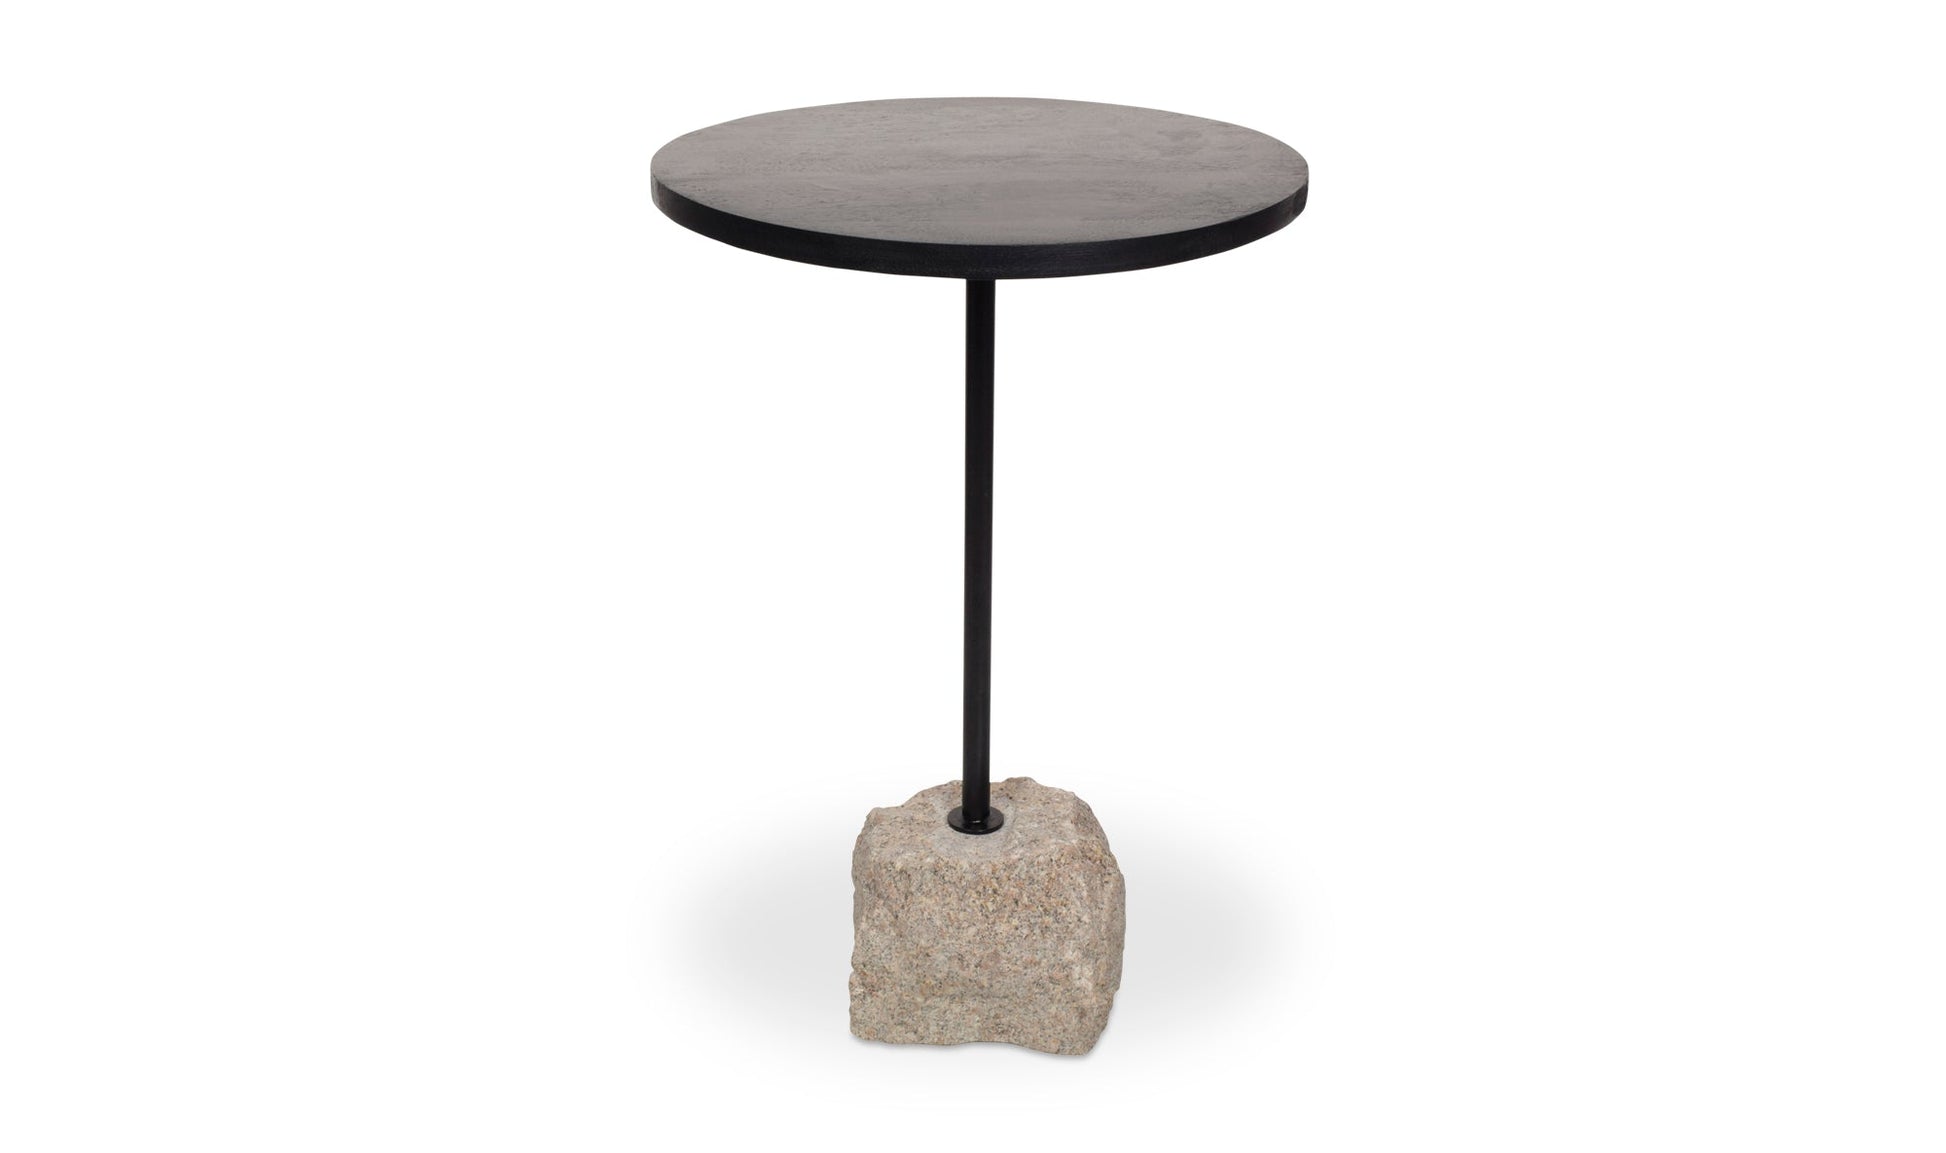 Moe's Furniture COLO ACCENT TABLE